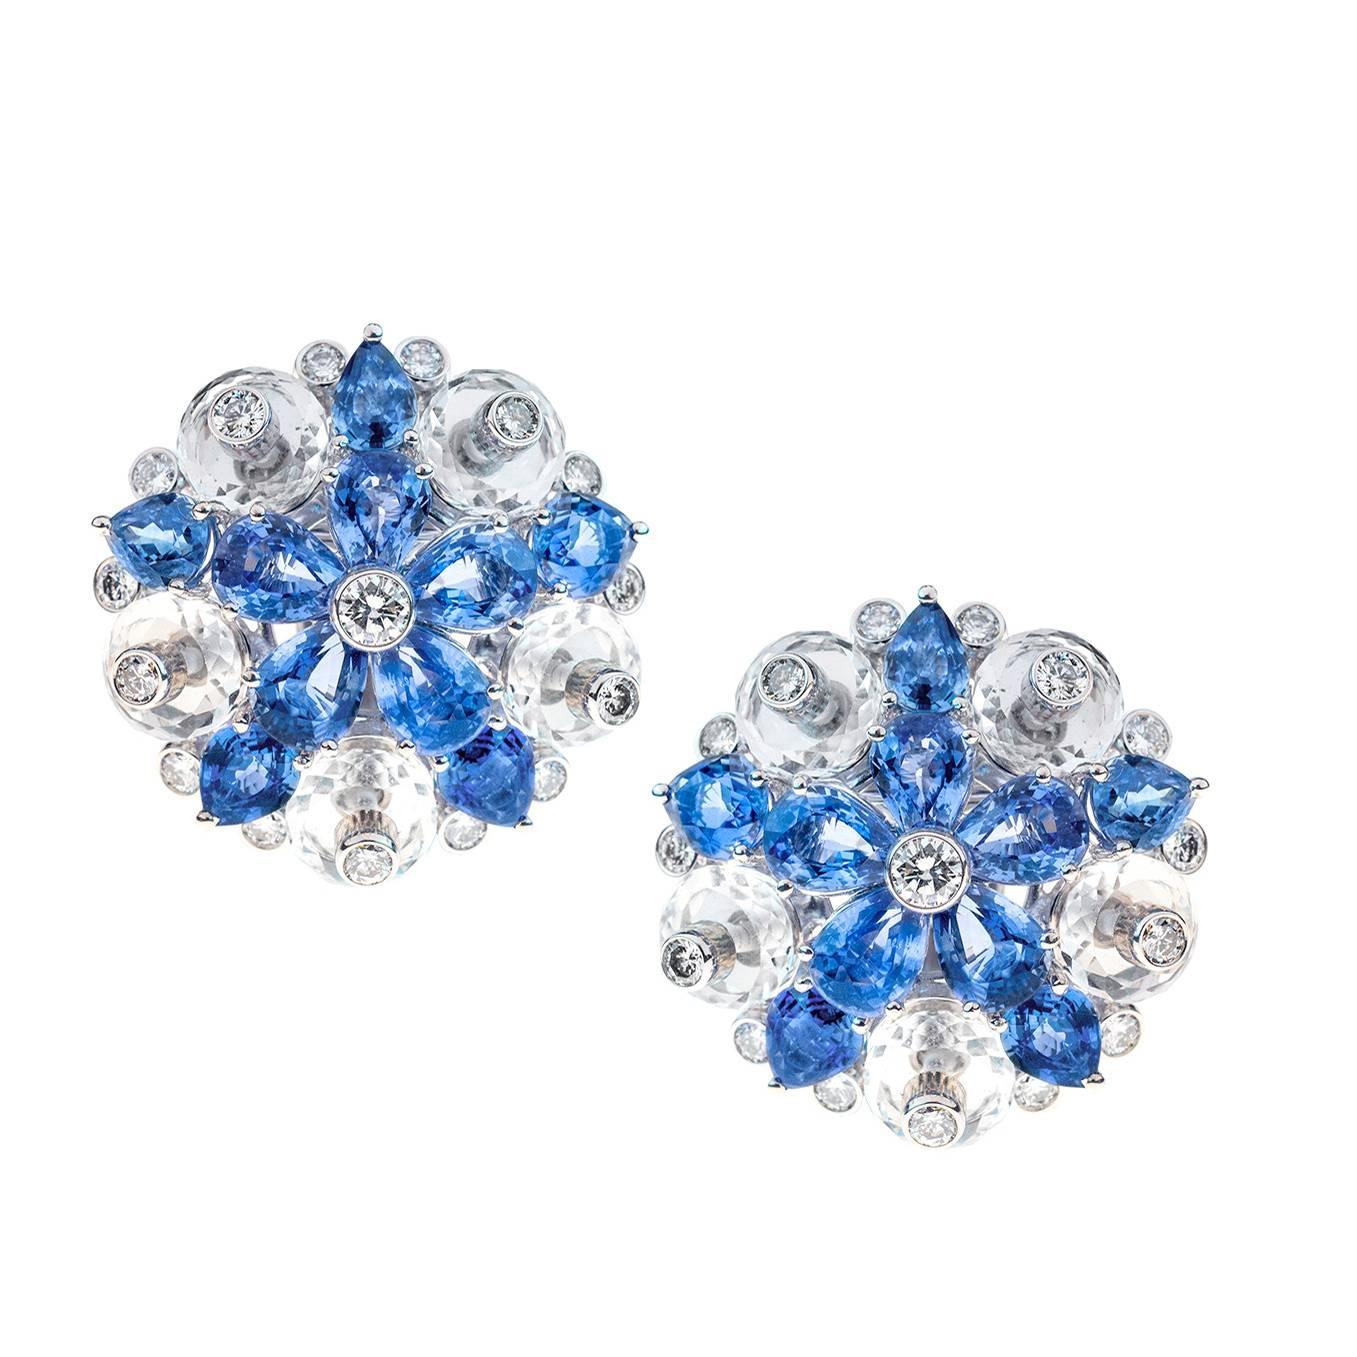 Sapphire Rock Crystal Diamond Earclips by Aletto Bros.